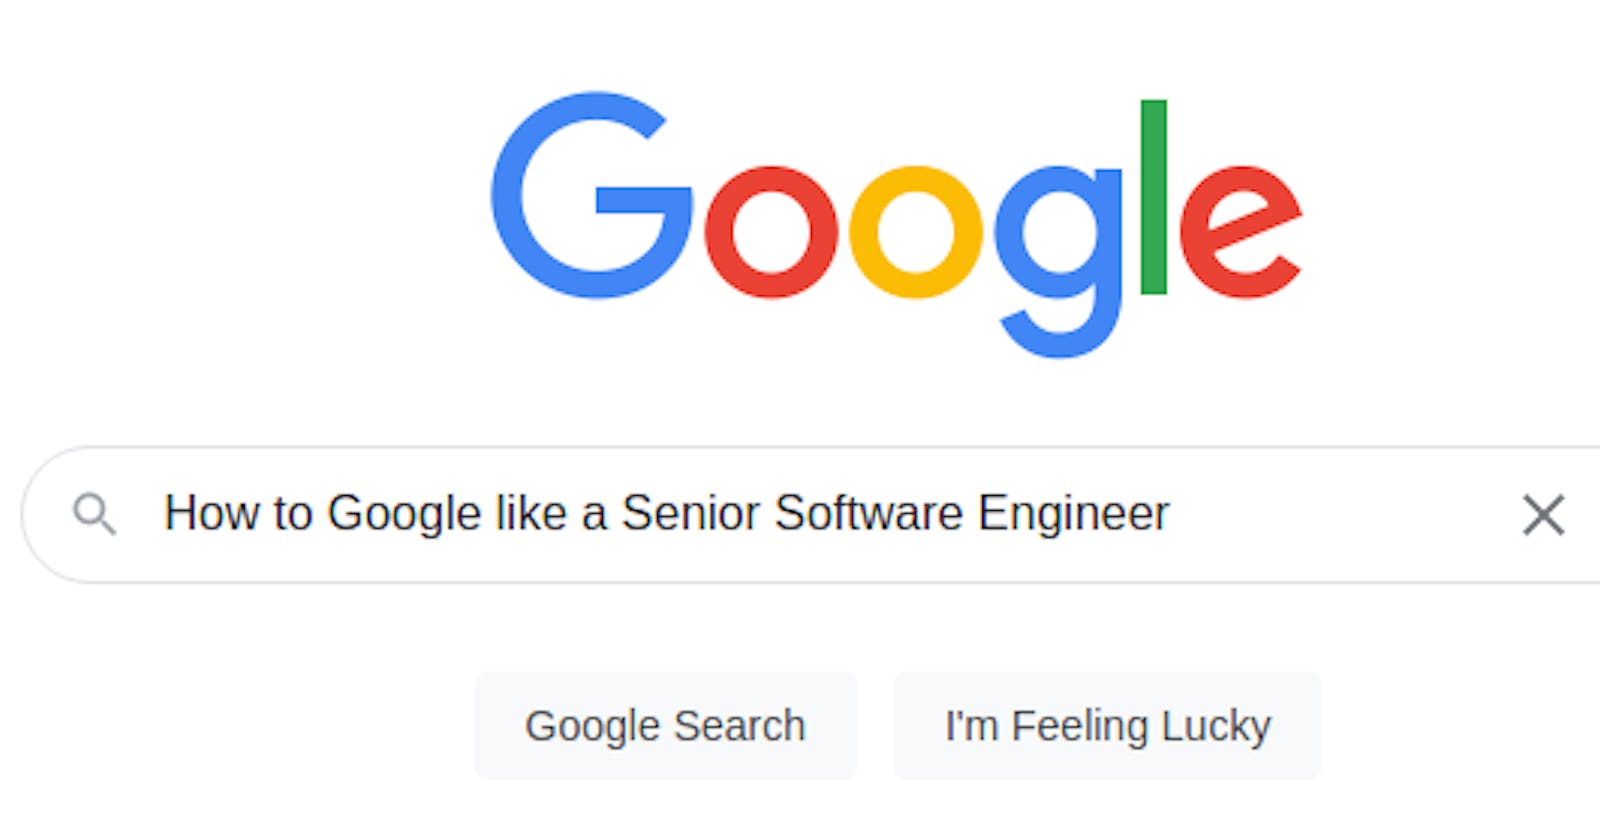 How to use Google as a Software Engineer